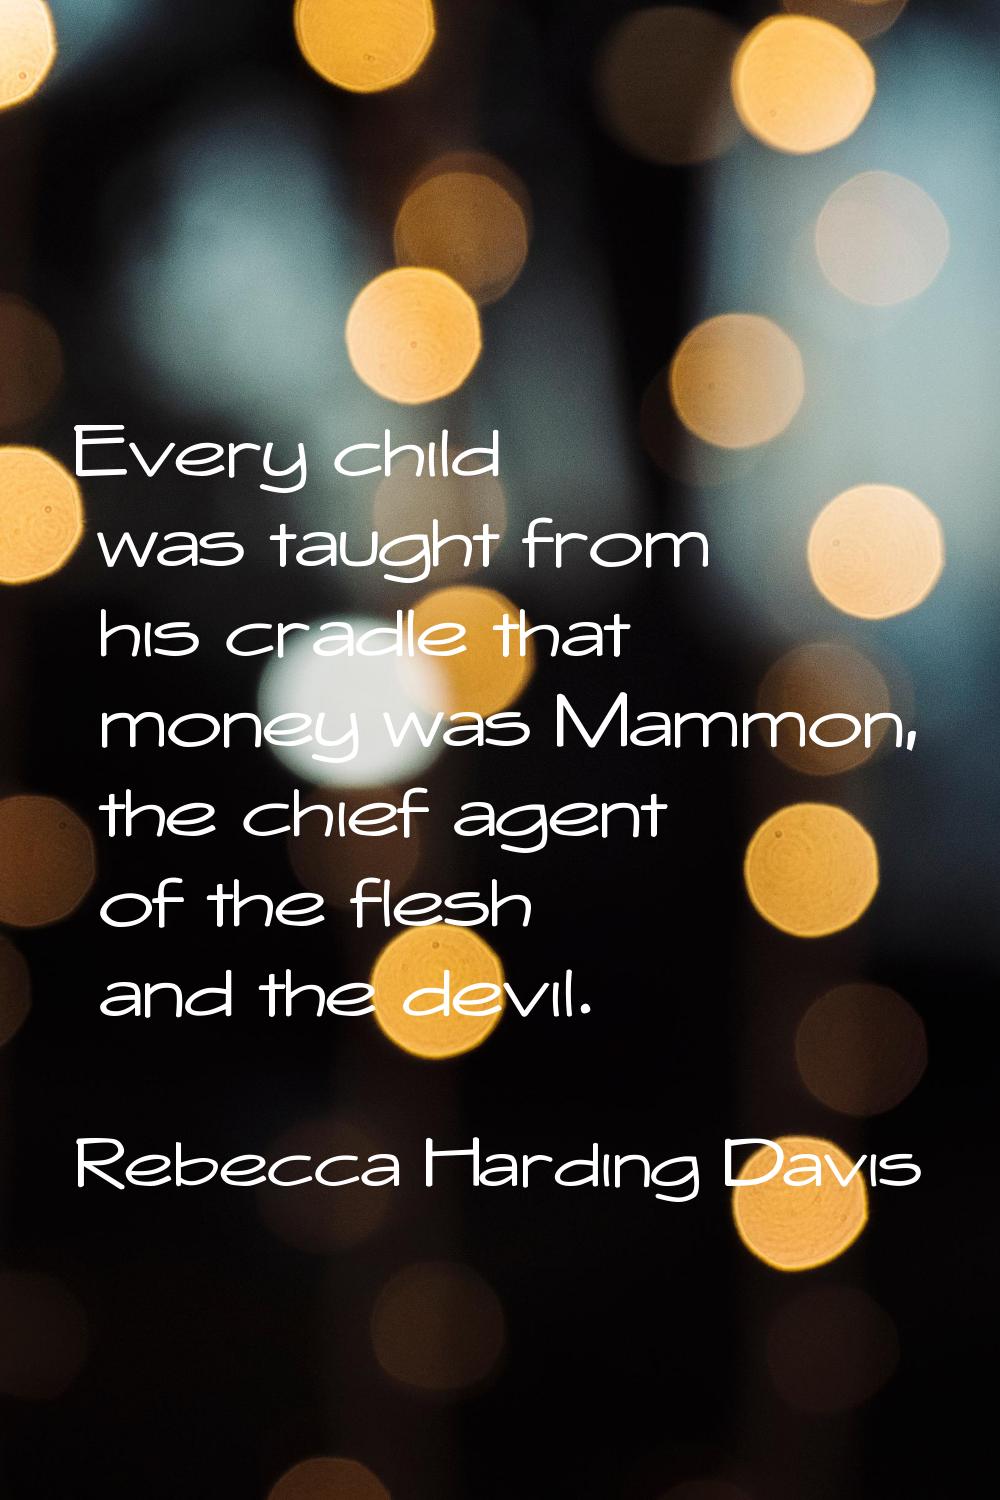 Every child was taught from his cradle that money was Mammon, the chief agent of the flesh and the 